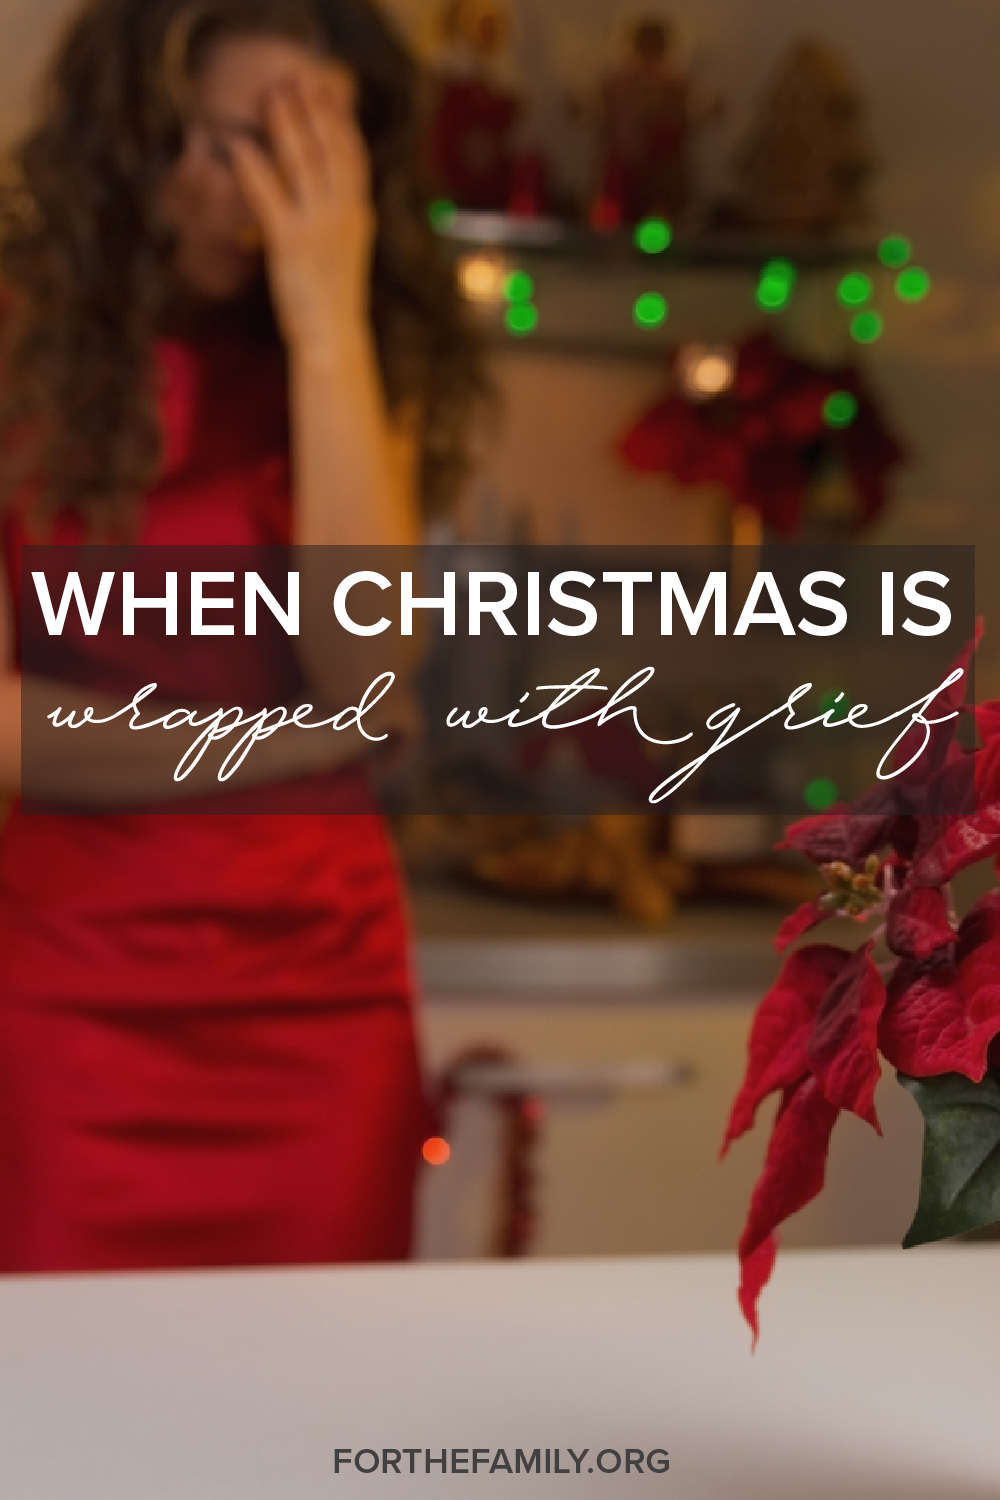 When Christmas is Wrapped With Grief